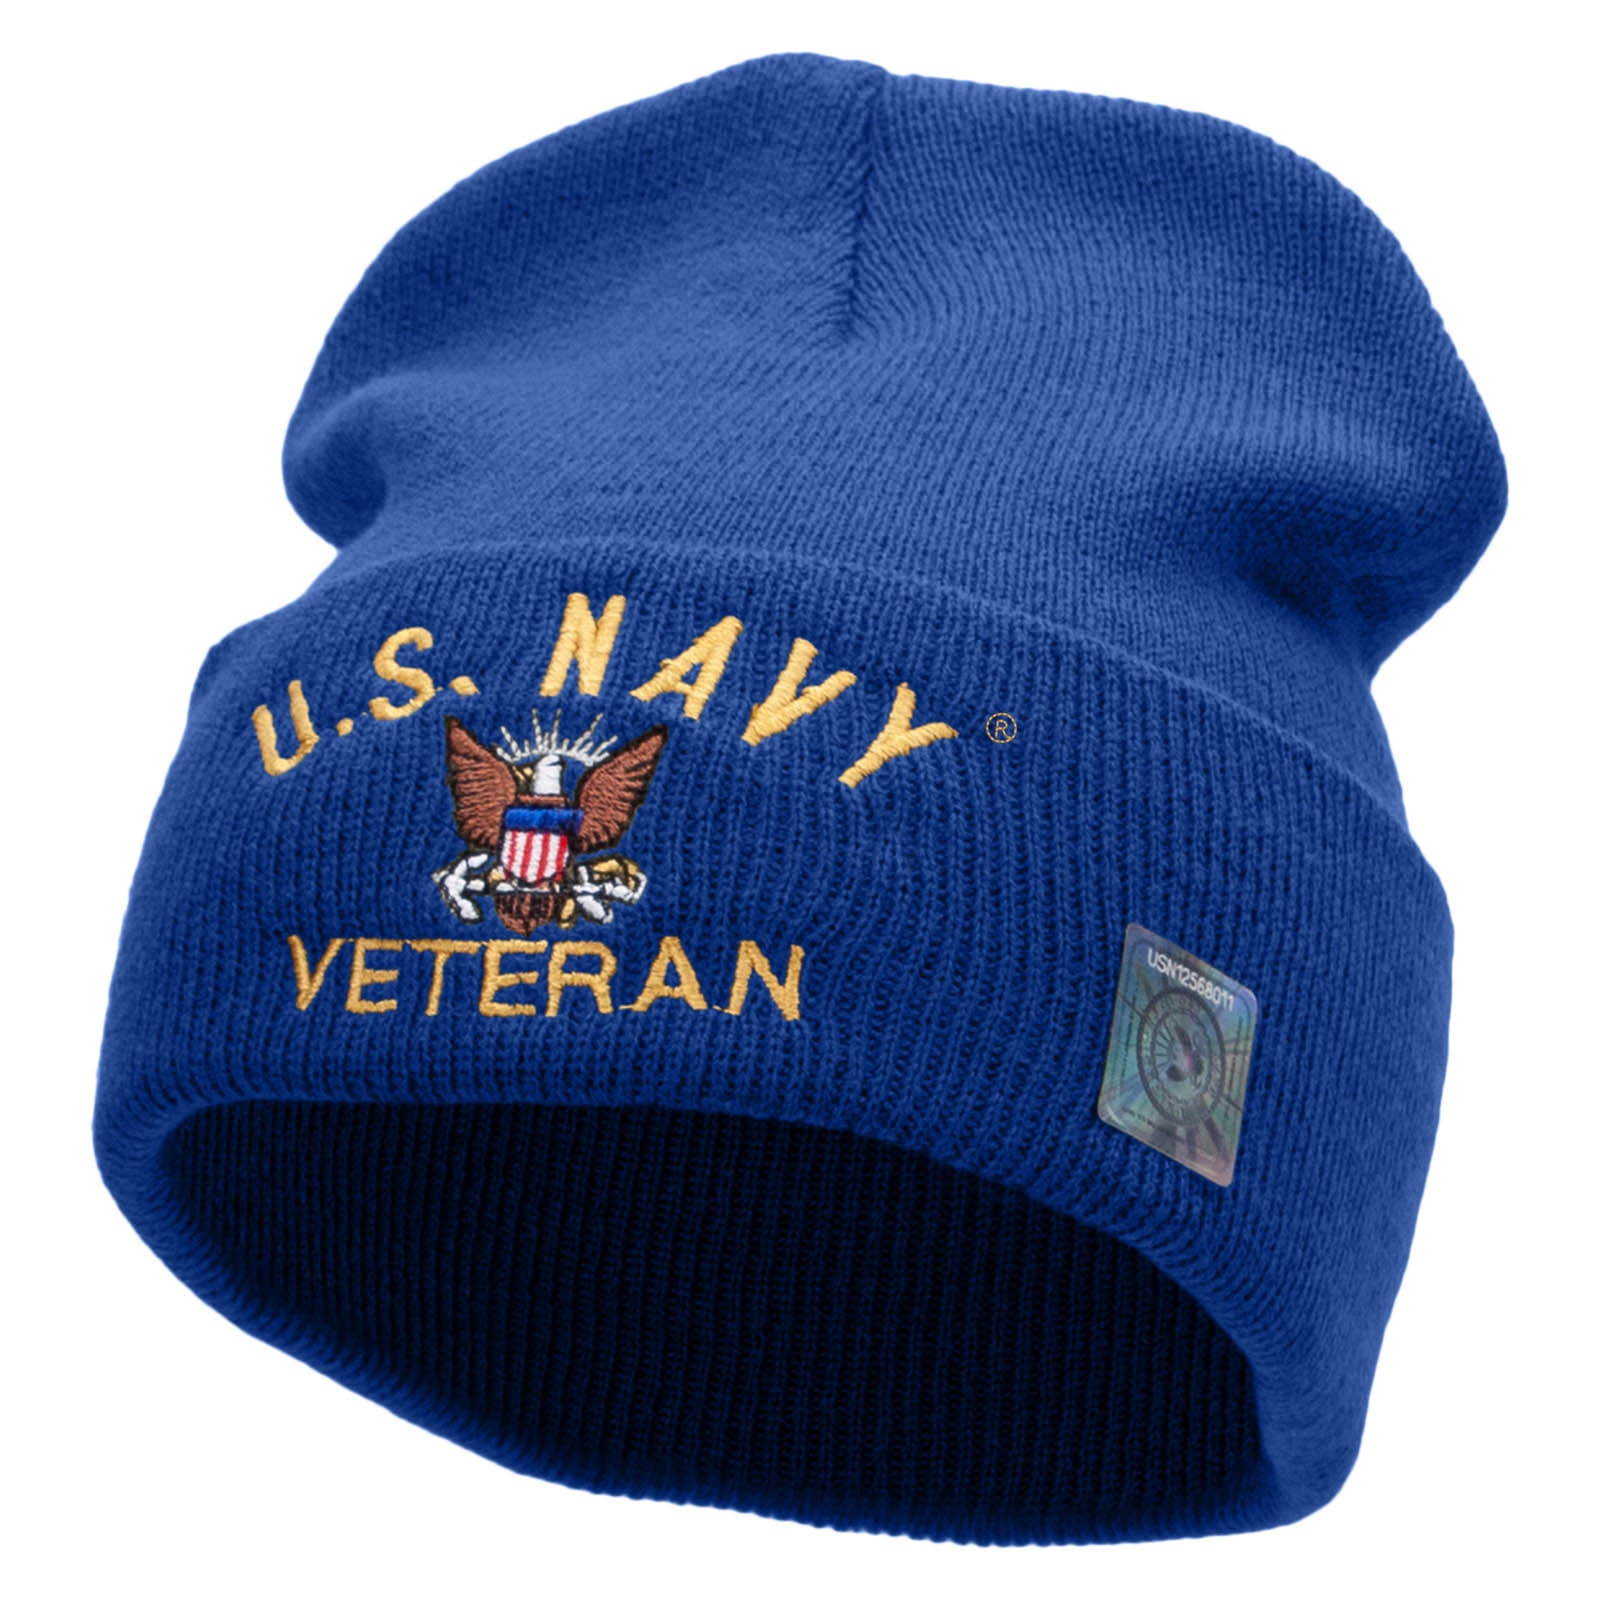 Licensed US Navy Veteran Military Embroidered Long Beanie Made in USA - Royal OSFM